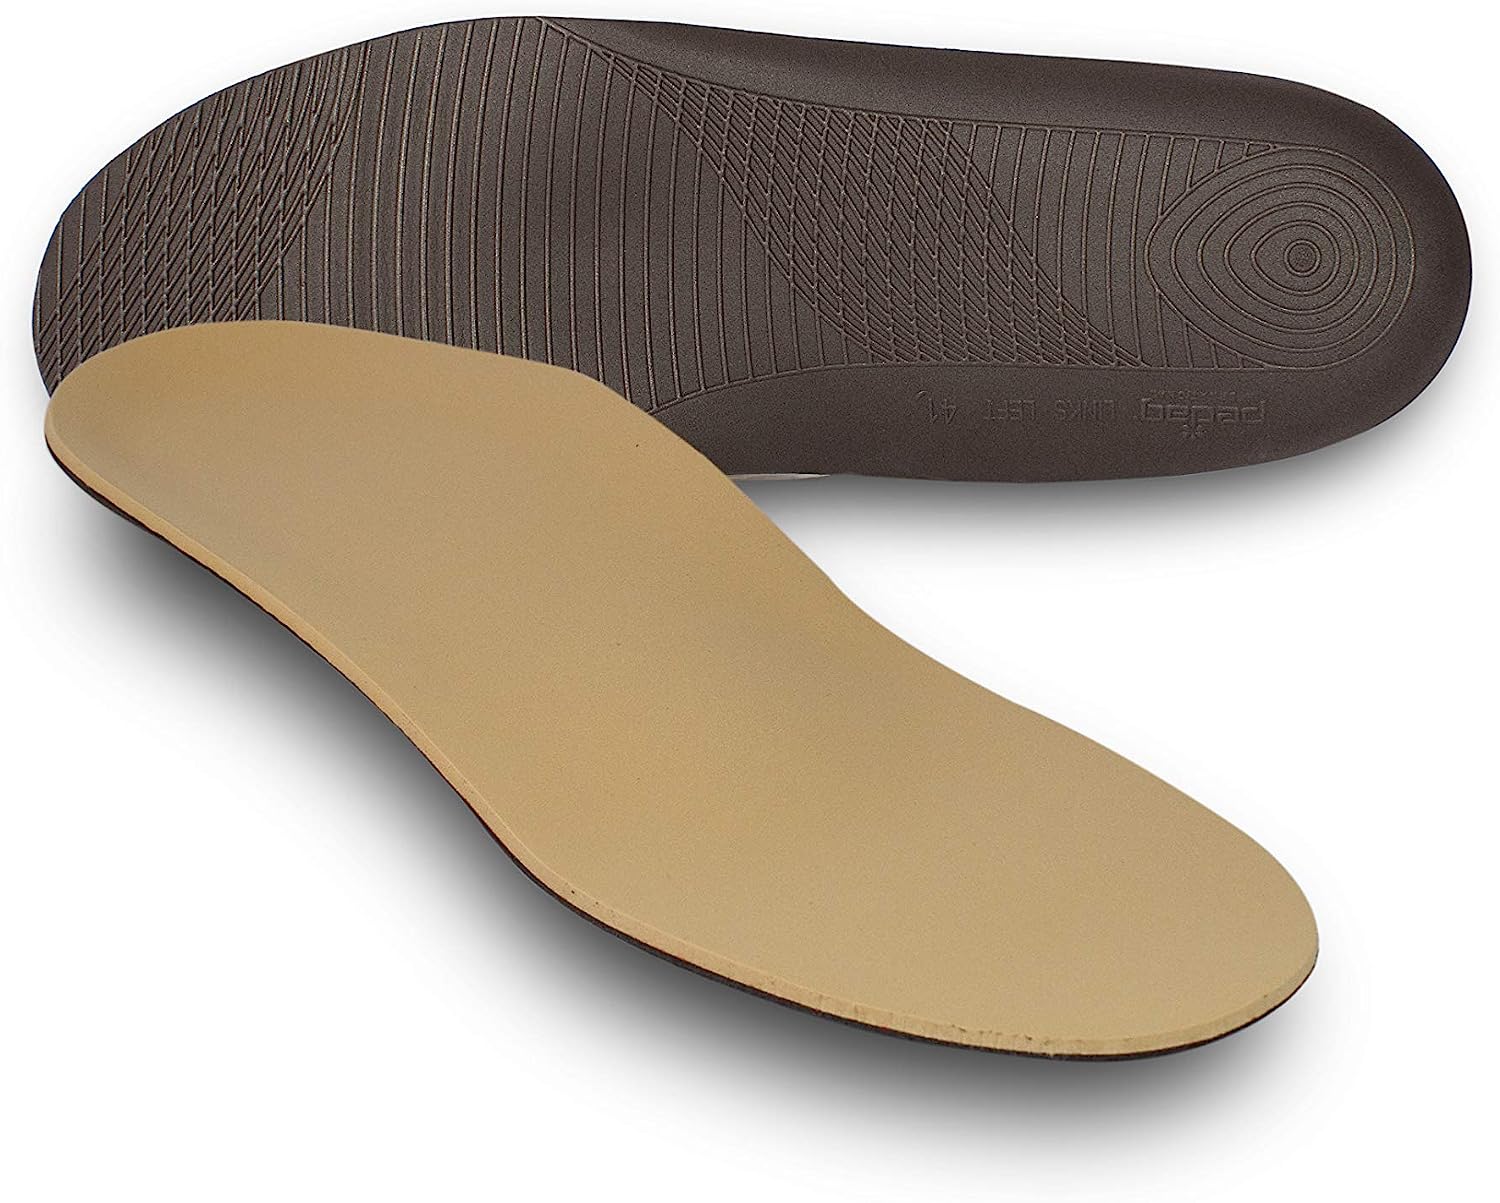 pedag Sensitive, German Made Insoles Specifically for [...]